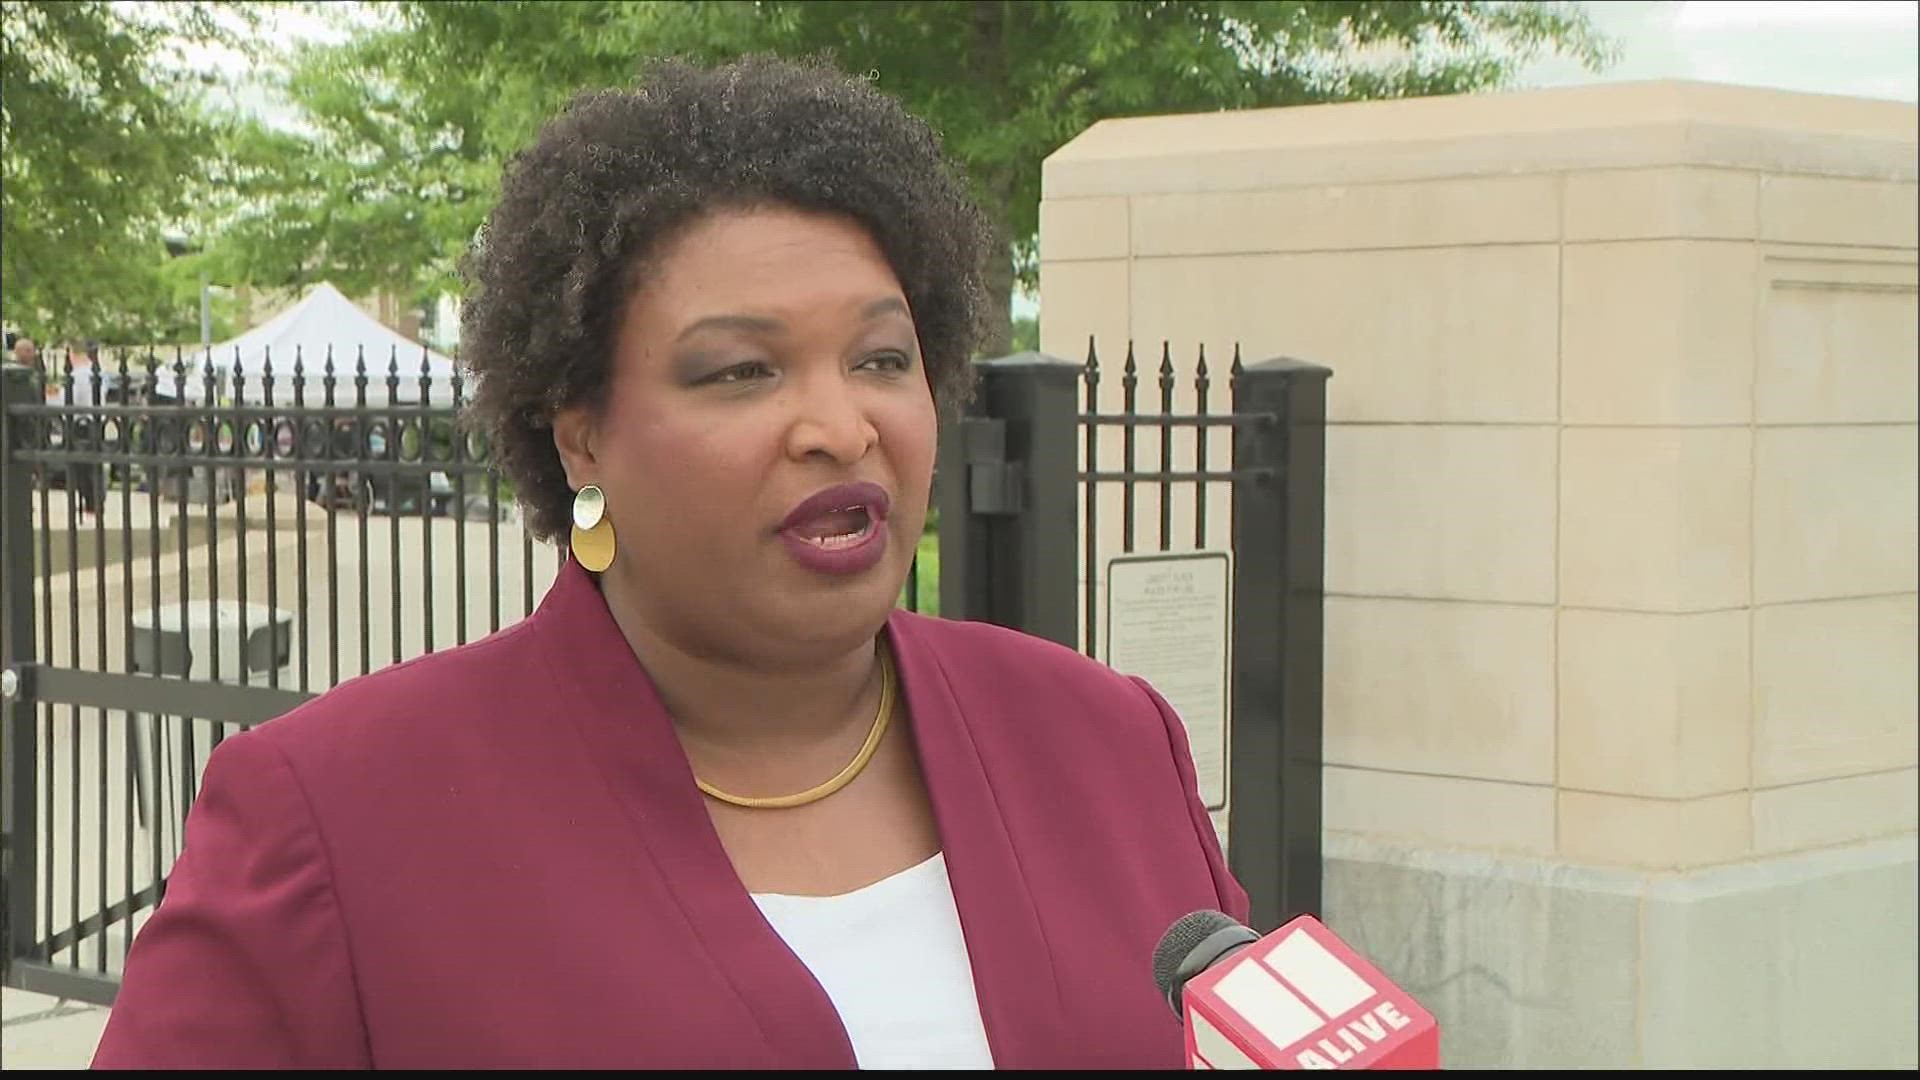 A long-running lawsuit brought by the Stacey Abrams-founded voting rights group Fair Fight Action after her 2018 election loss in Georgia has been rejected.